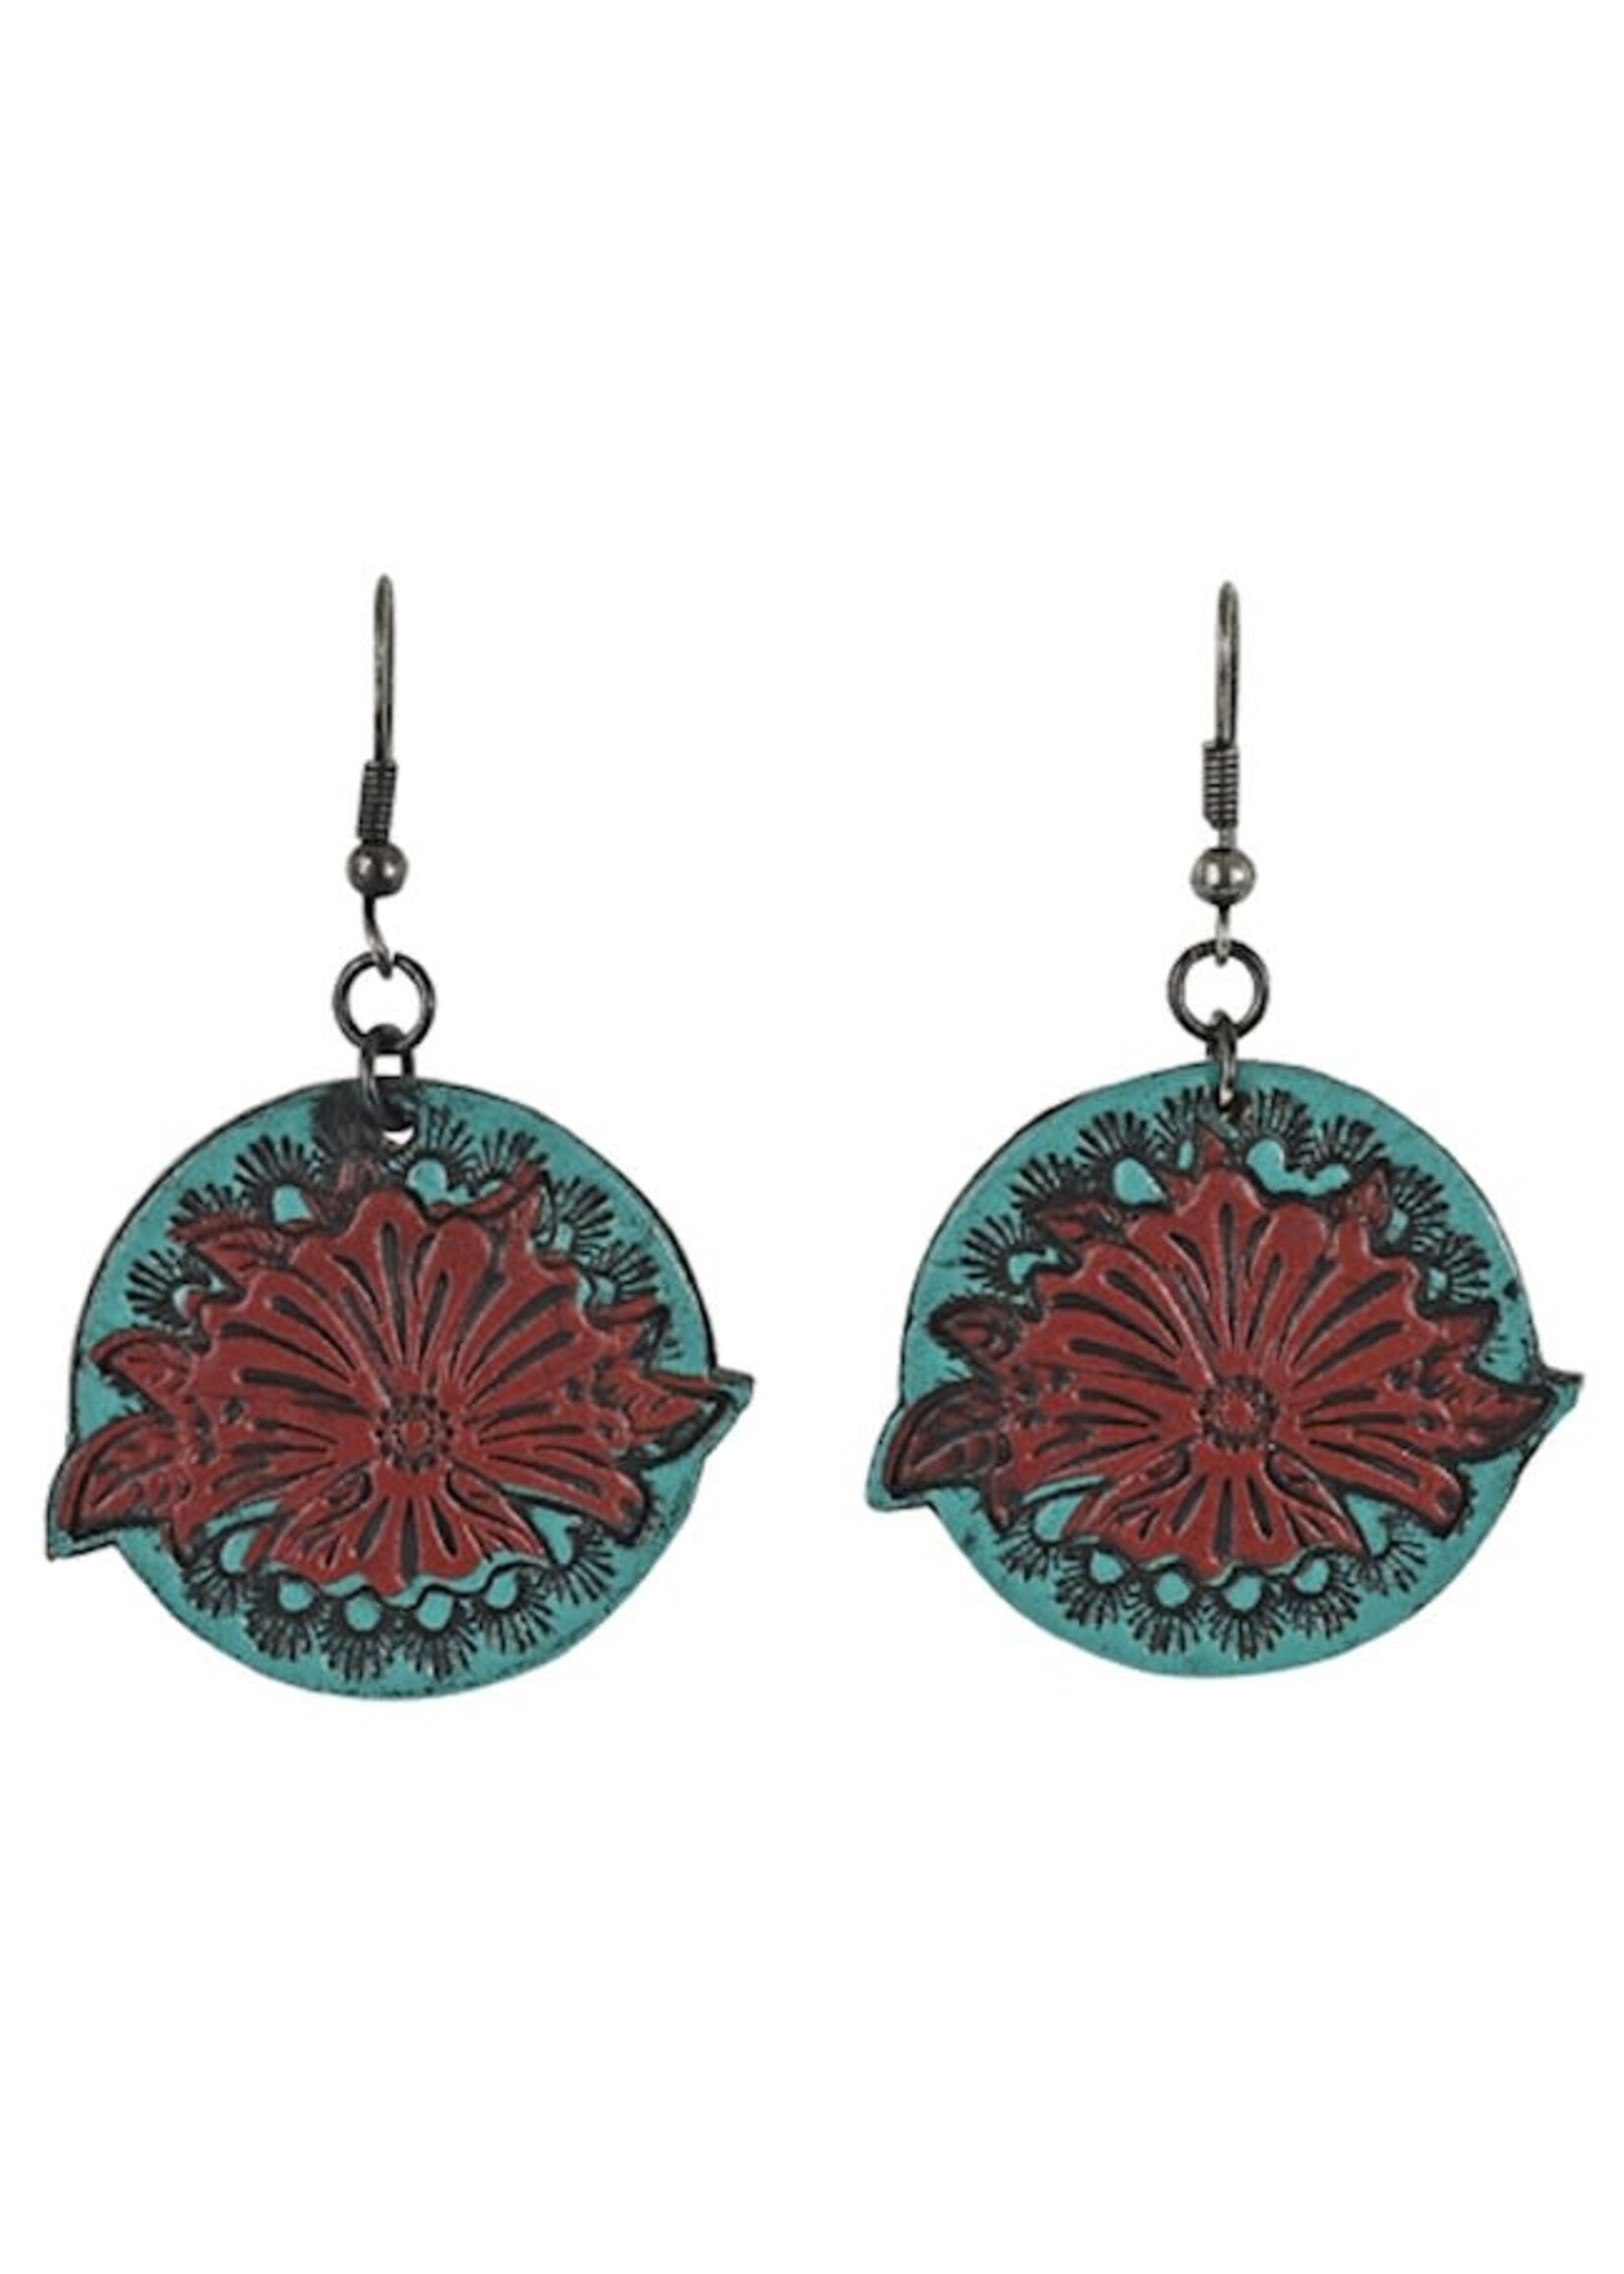 Justin Earrings - Tooled Red & Turquoise Accents